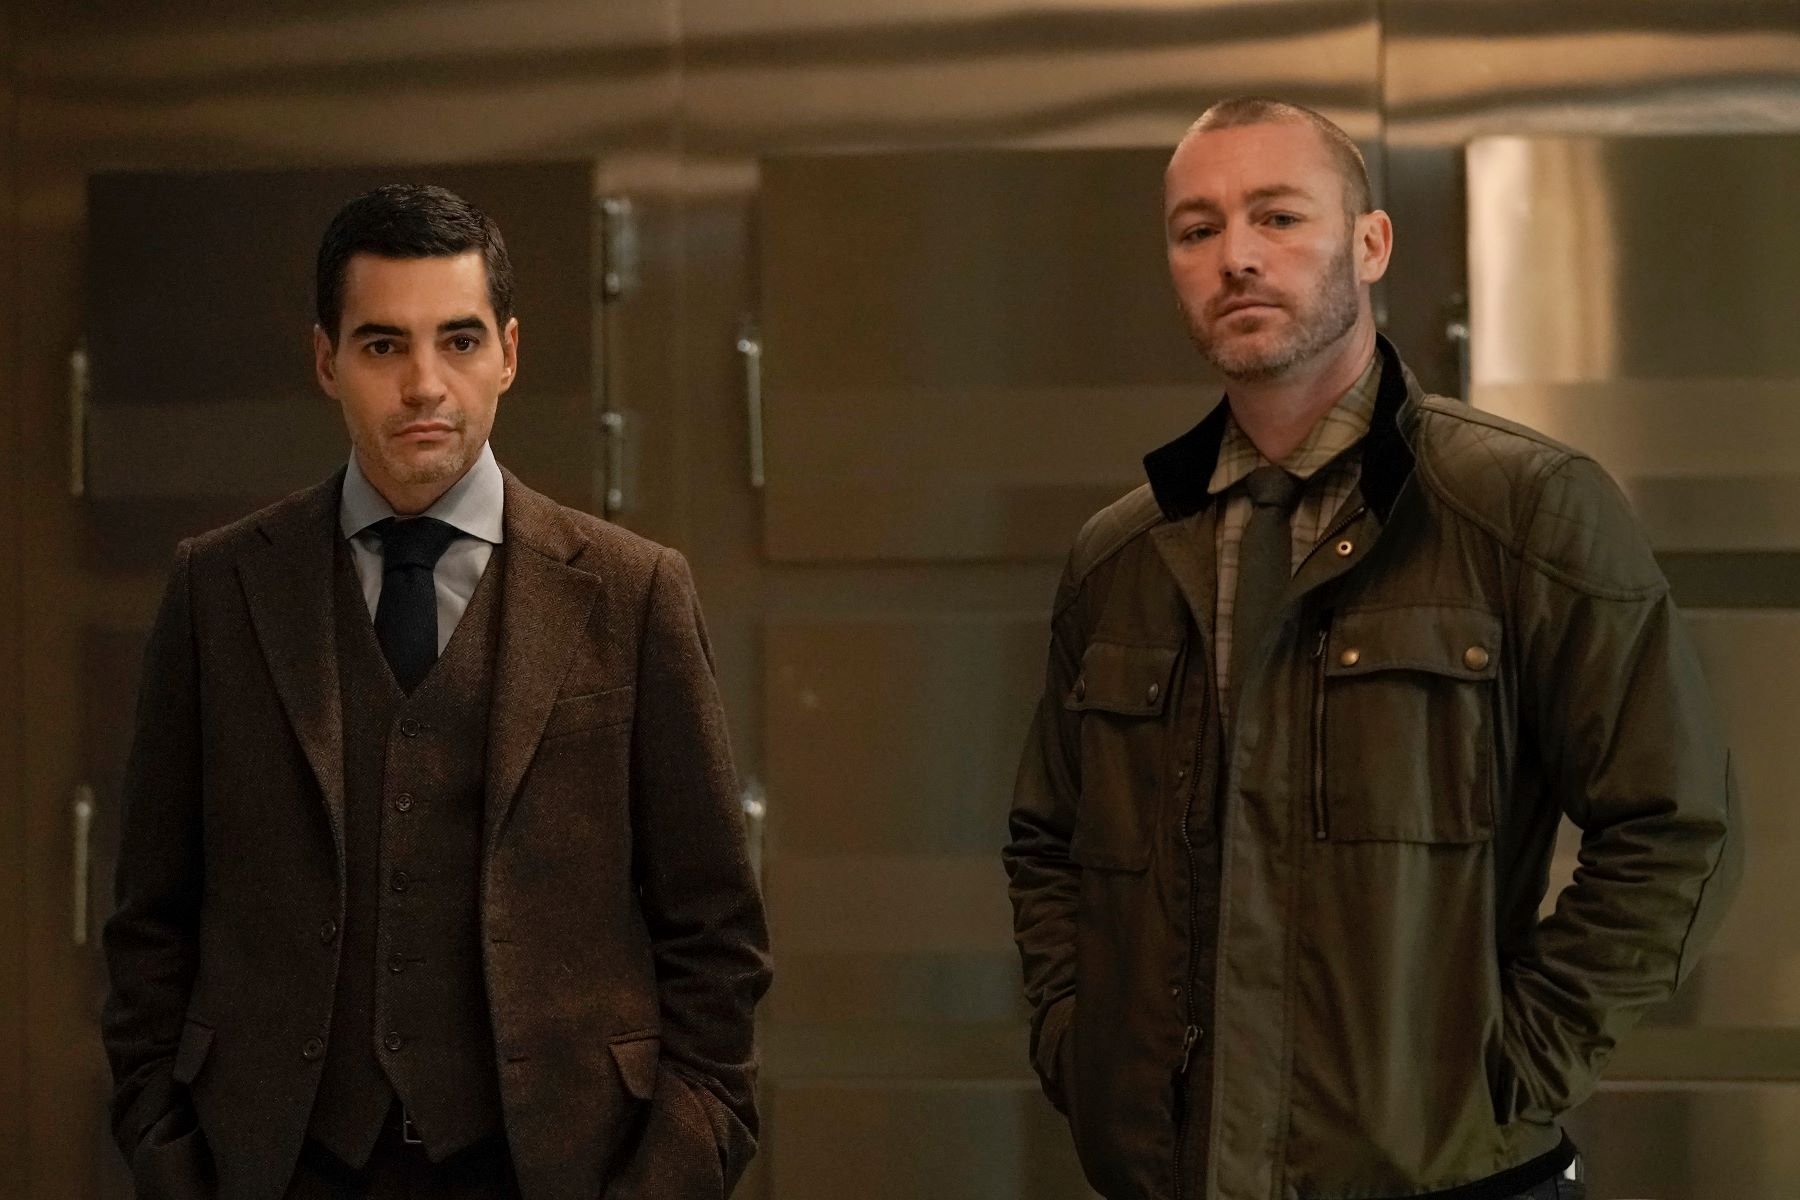 Ramón Rodríguez and Jake McLaughlin, in character as Will Trent and Michael Ormewood, share a scene in 'Will Trent' Season 1 Episode 4. Will wears a dark brown three piece suit over a light gray button-up shirt and black tie. Ormewood wears a dark green jacket over a light green plaid shirt and dark green tie.